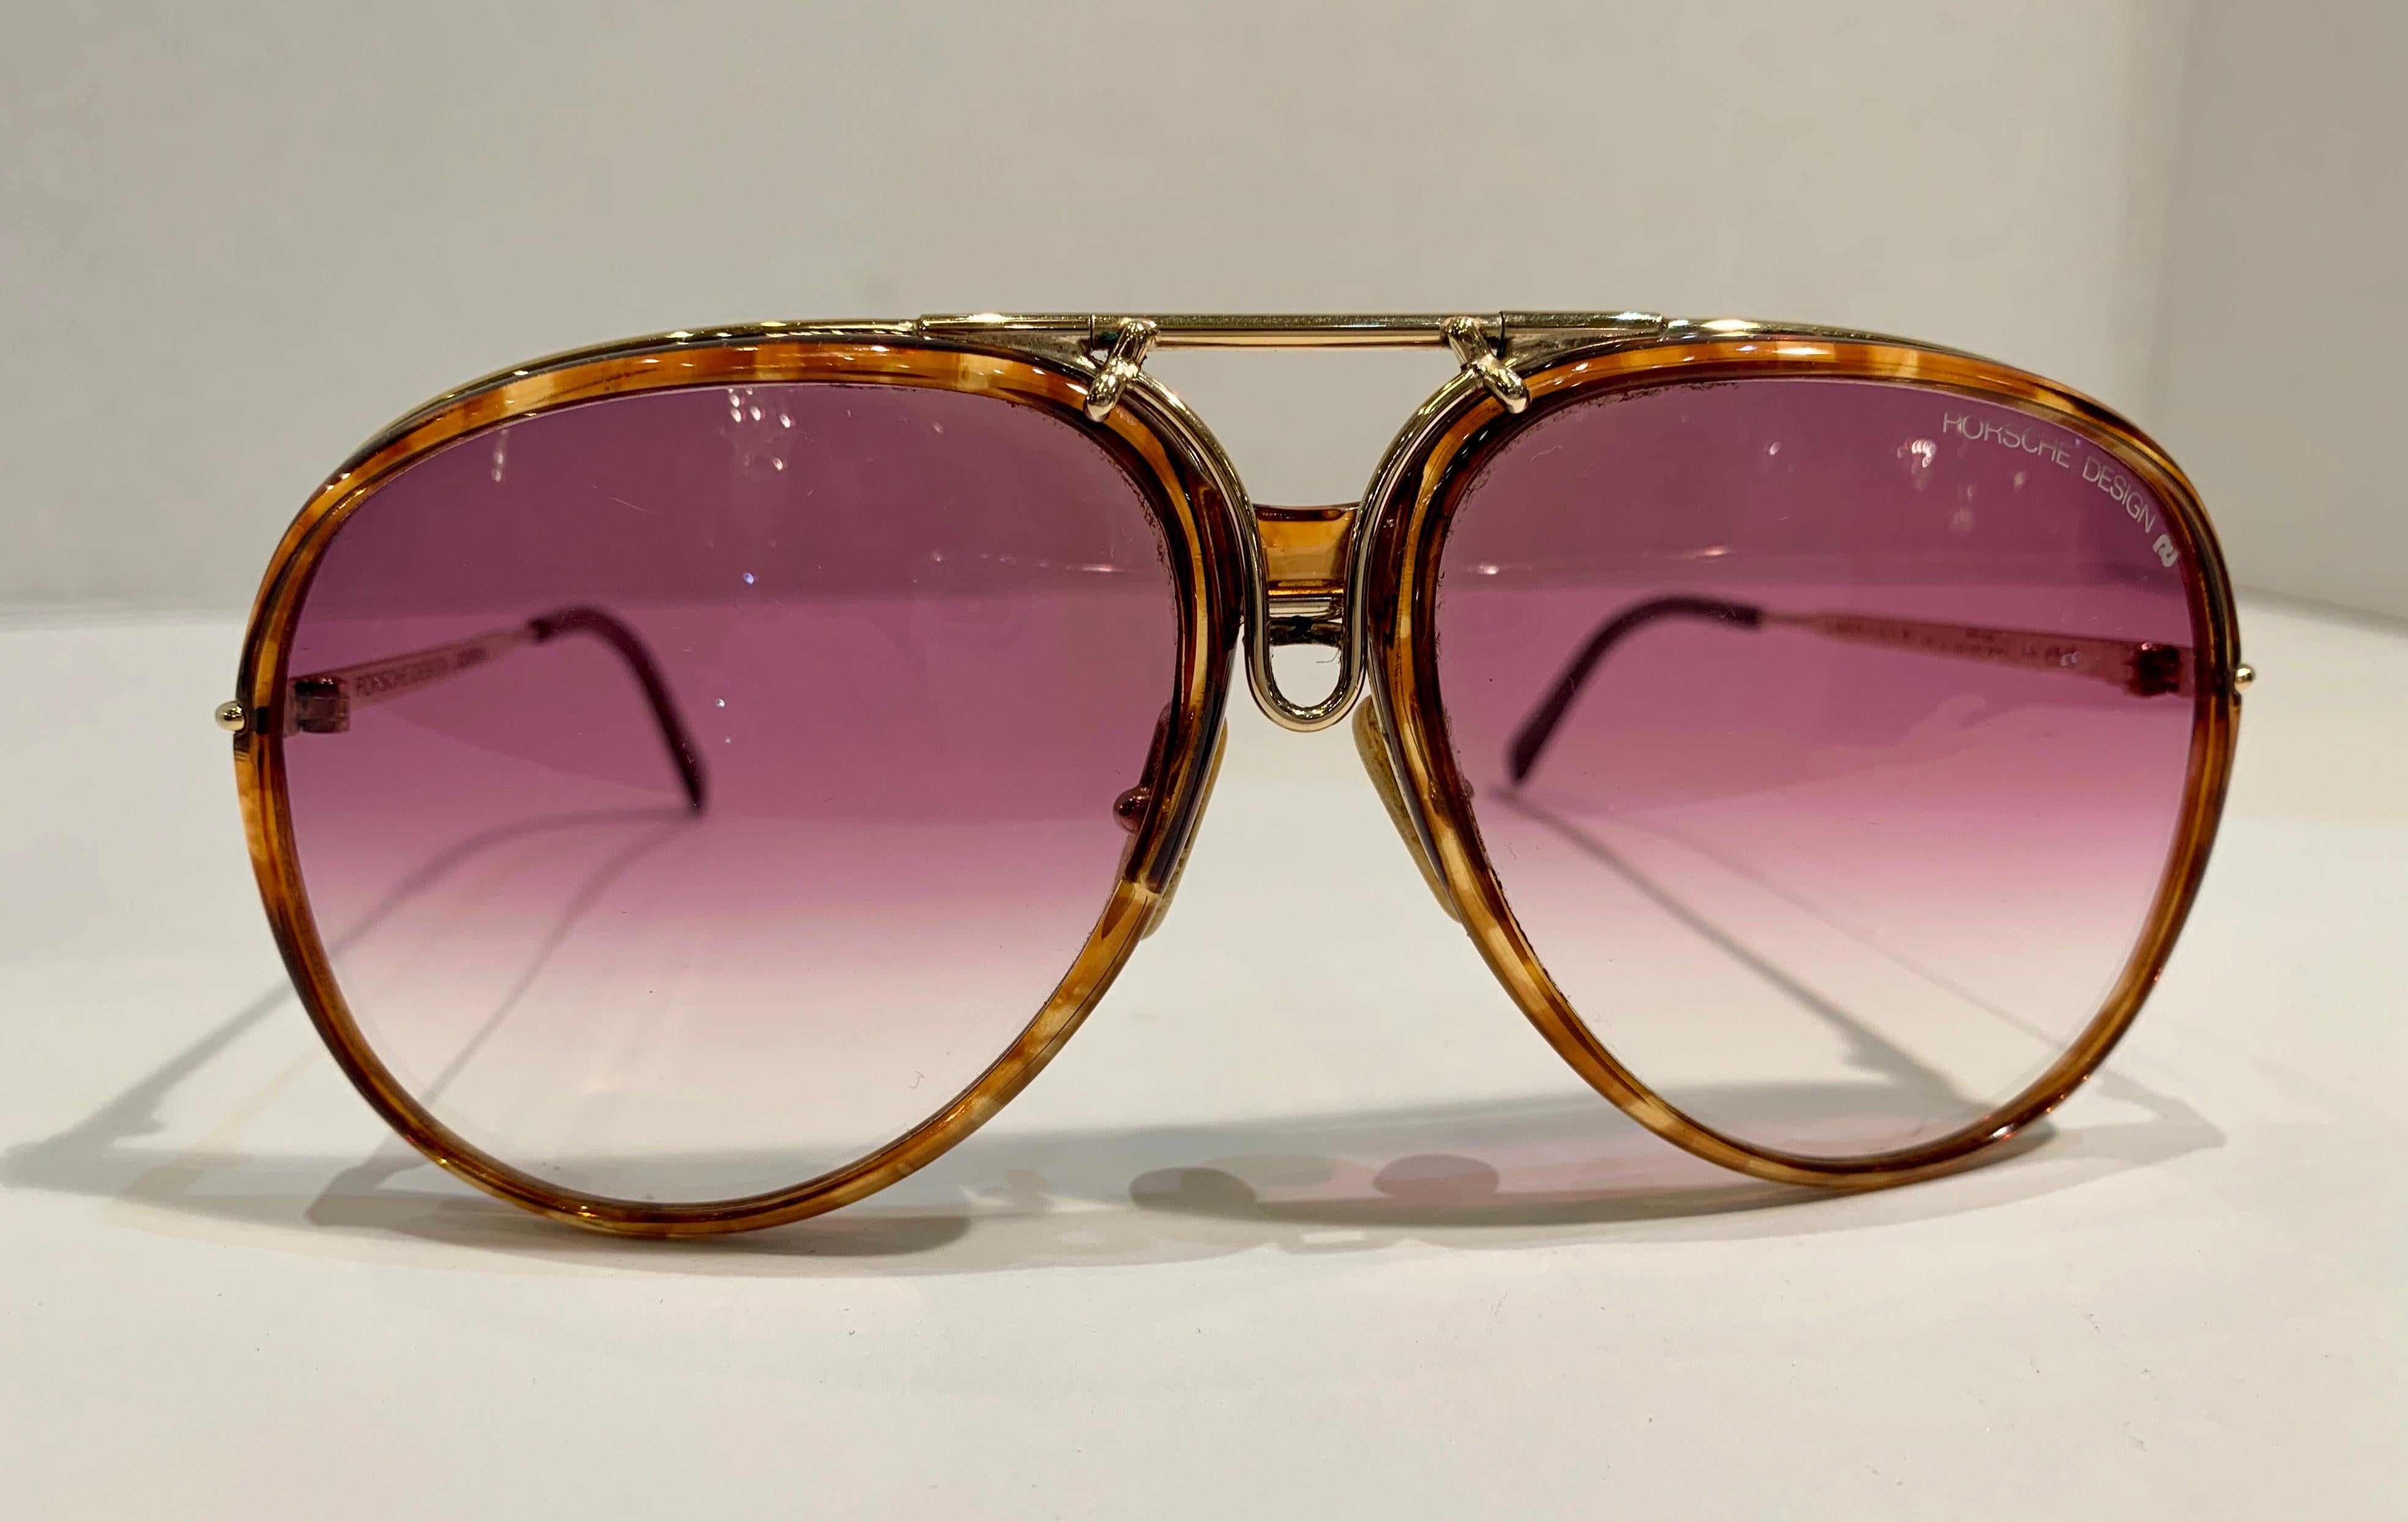 Vintage, ultra-rare 1980's innovative Porsche Design by Carrera large gold metal aviator style sunglasses.   Frame features two sets of interchangeable lenses, black lenses with black rims and rose colored lenses with tortoise shell rims.  Very